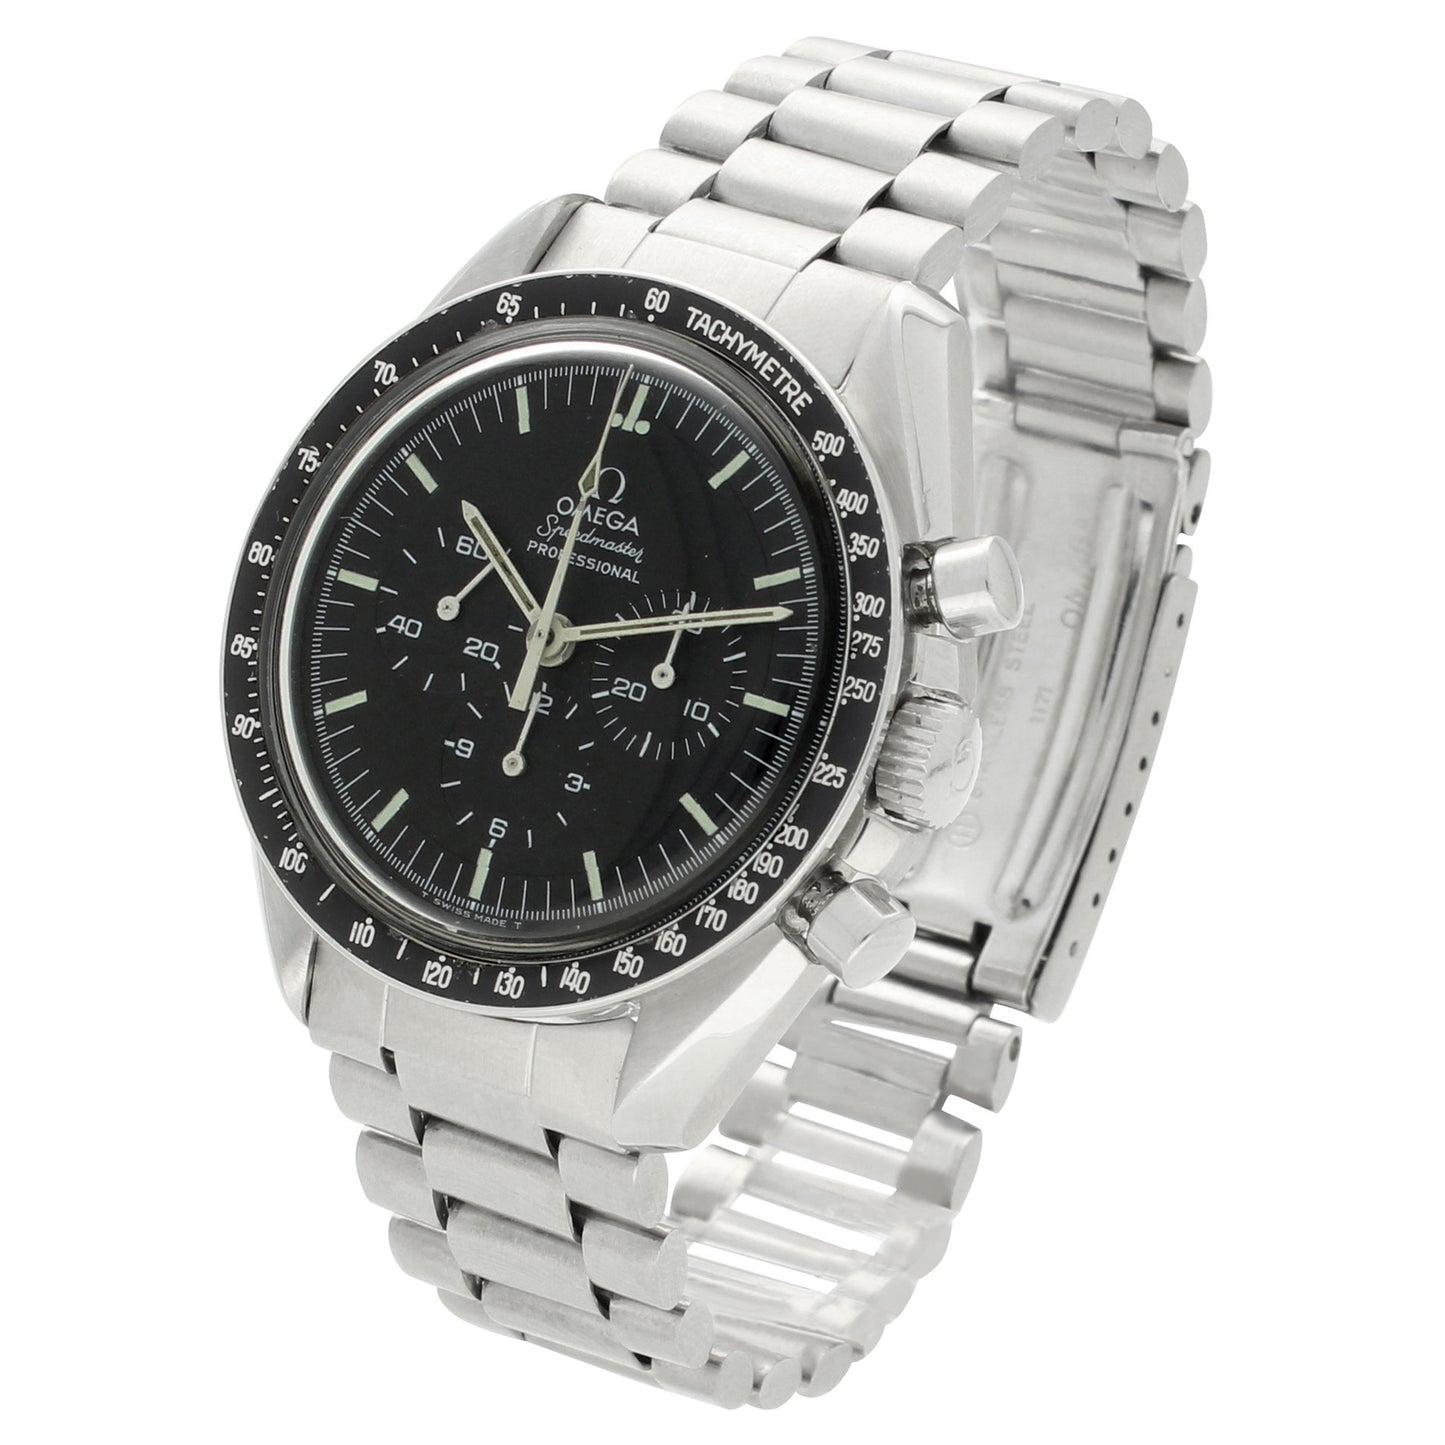 Stainless steel Speedmaster, reference 145.022 'Straight case writing' Professional chronograph wristwatch. Made 1971